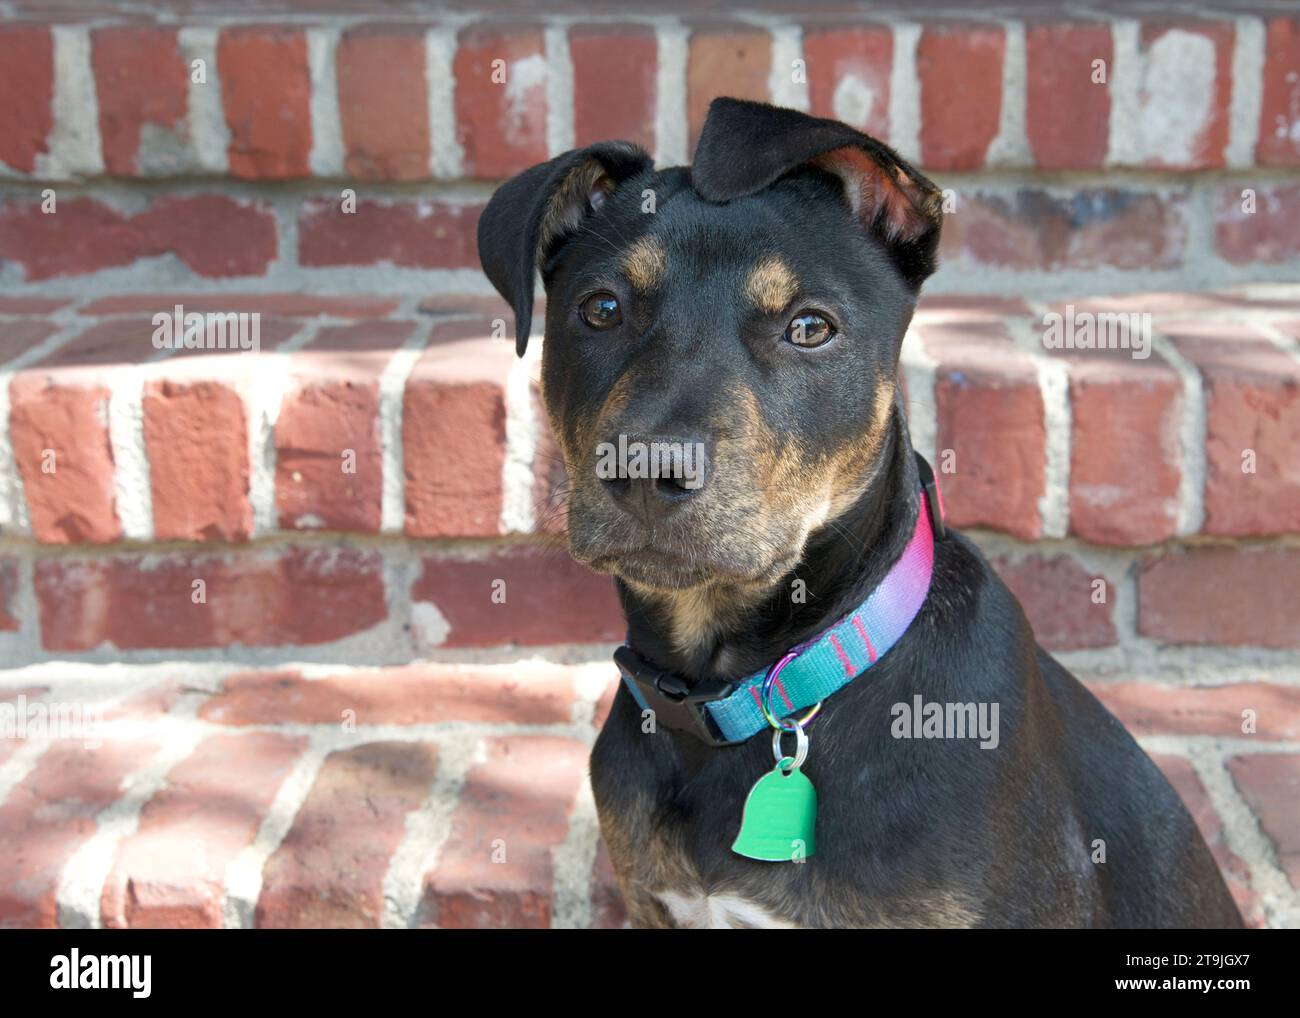 Close up portrait of a black and brown brindle American Staffordshire Terrier puppy sitting on brick steps with steps behind. Looking directly at view Stock Photo